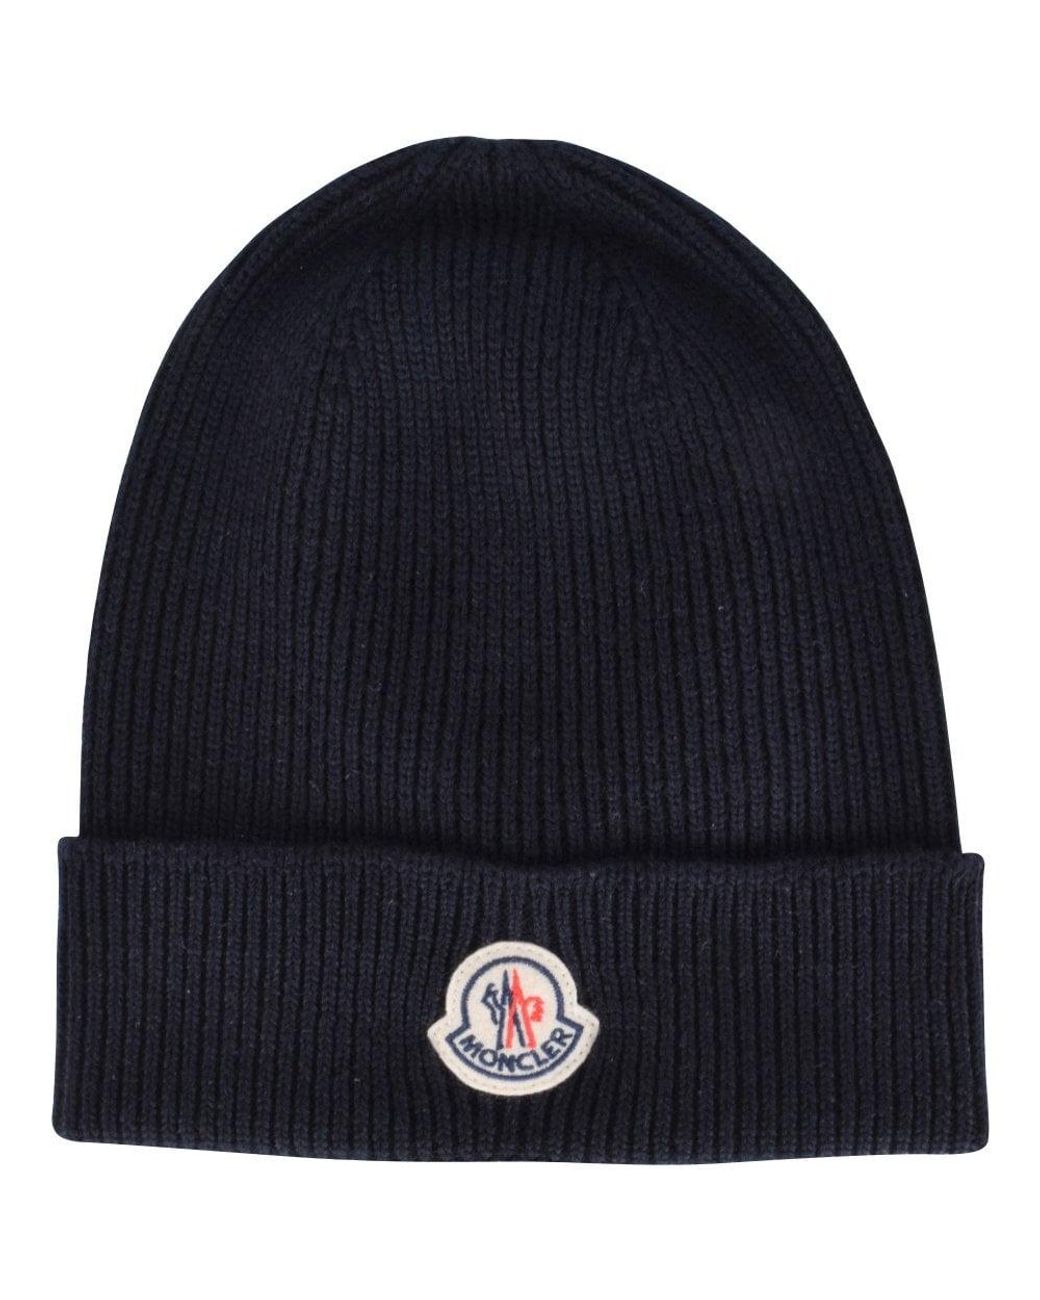 Moncler Wool Navy Ribbed Knit Beanie in Blue for Men - Lyst